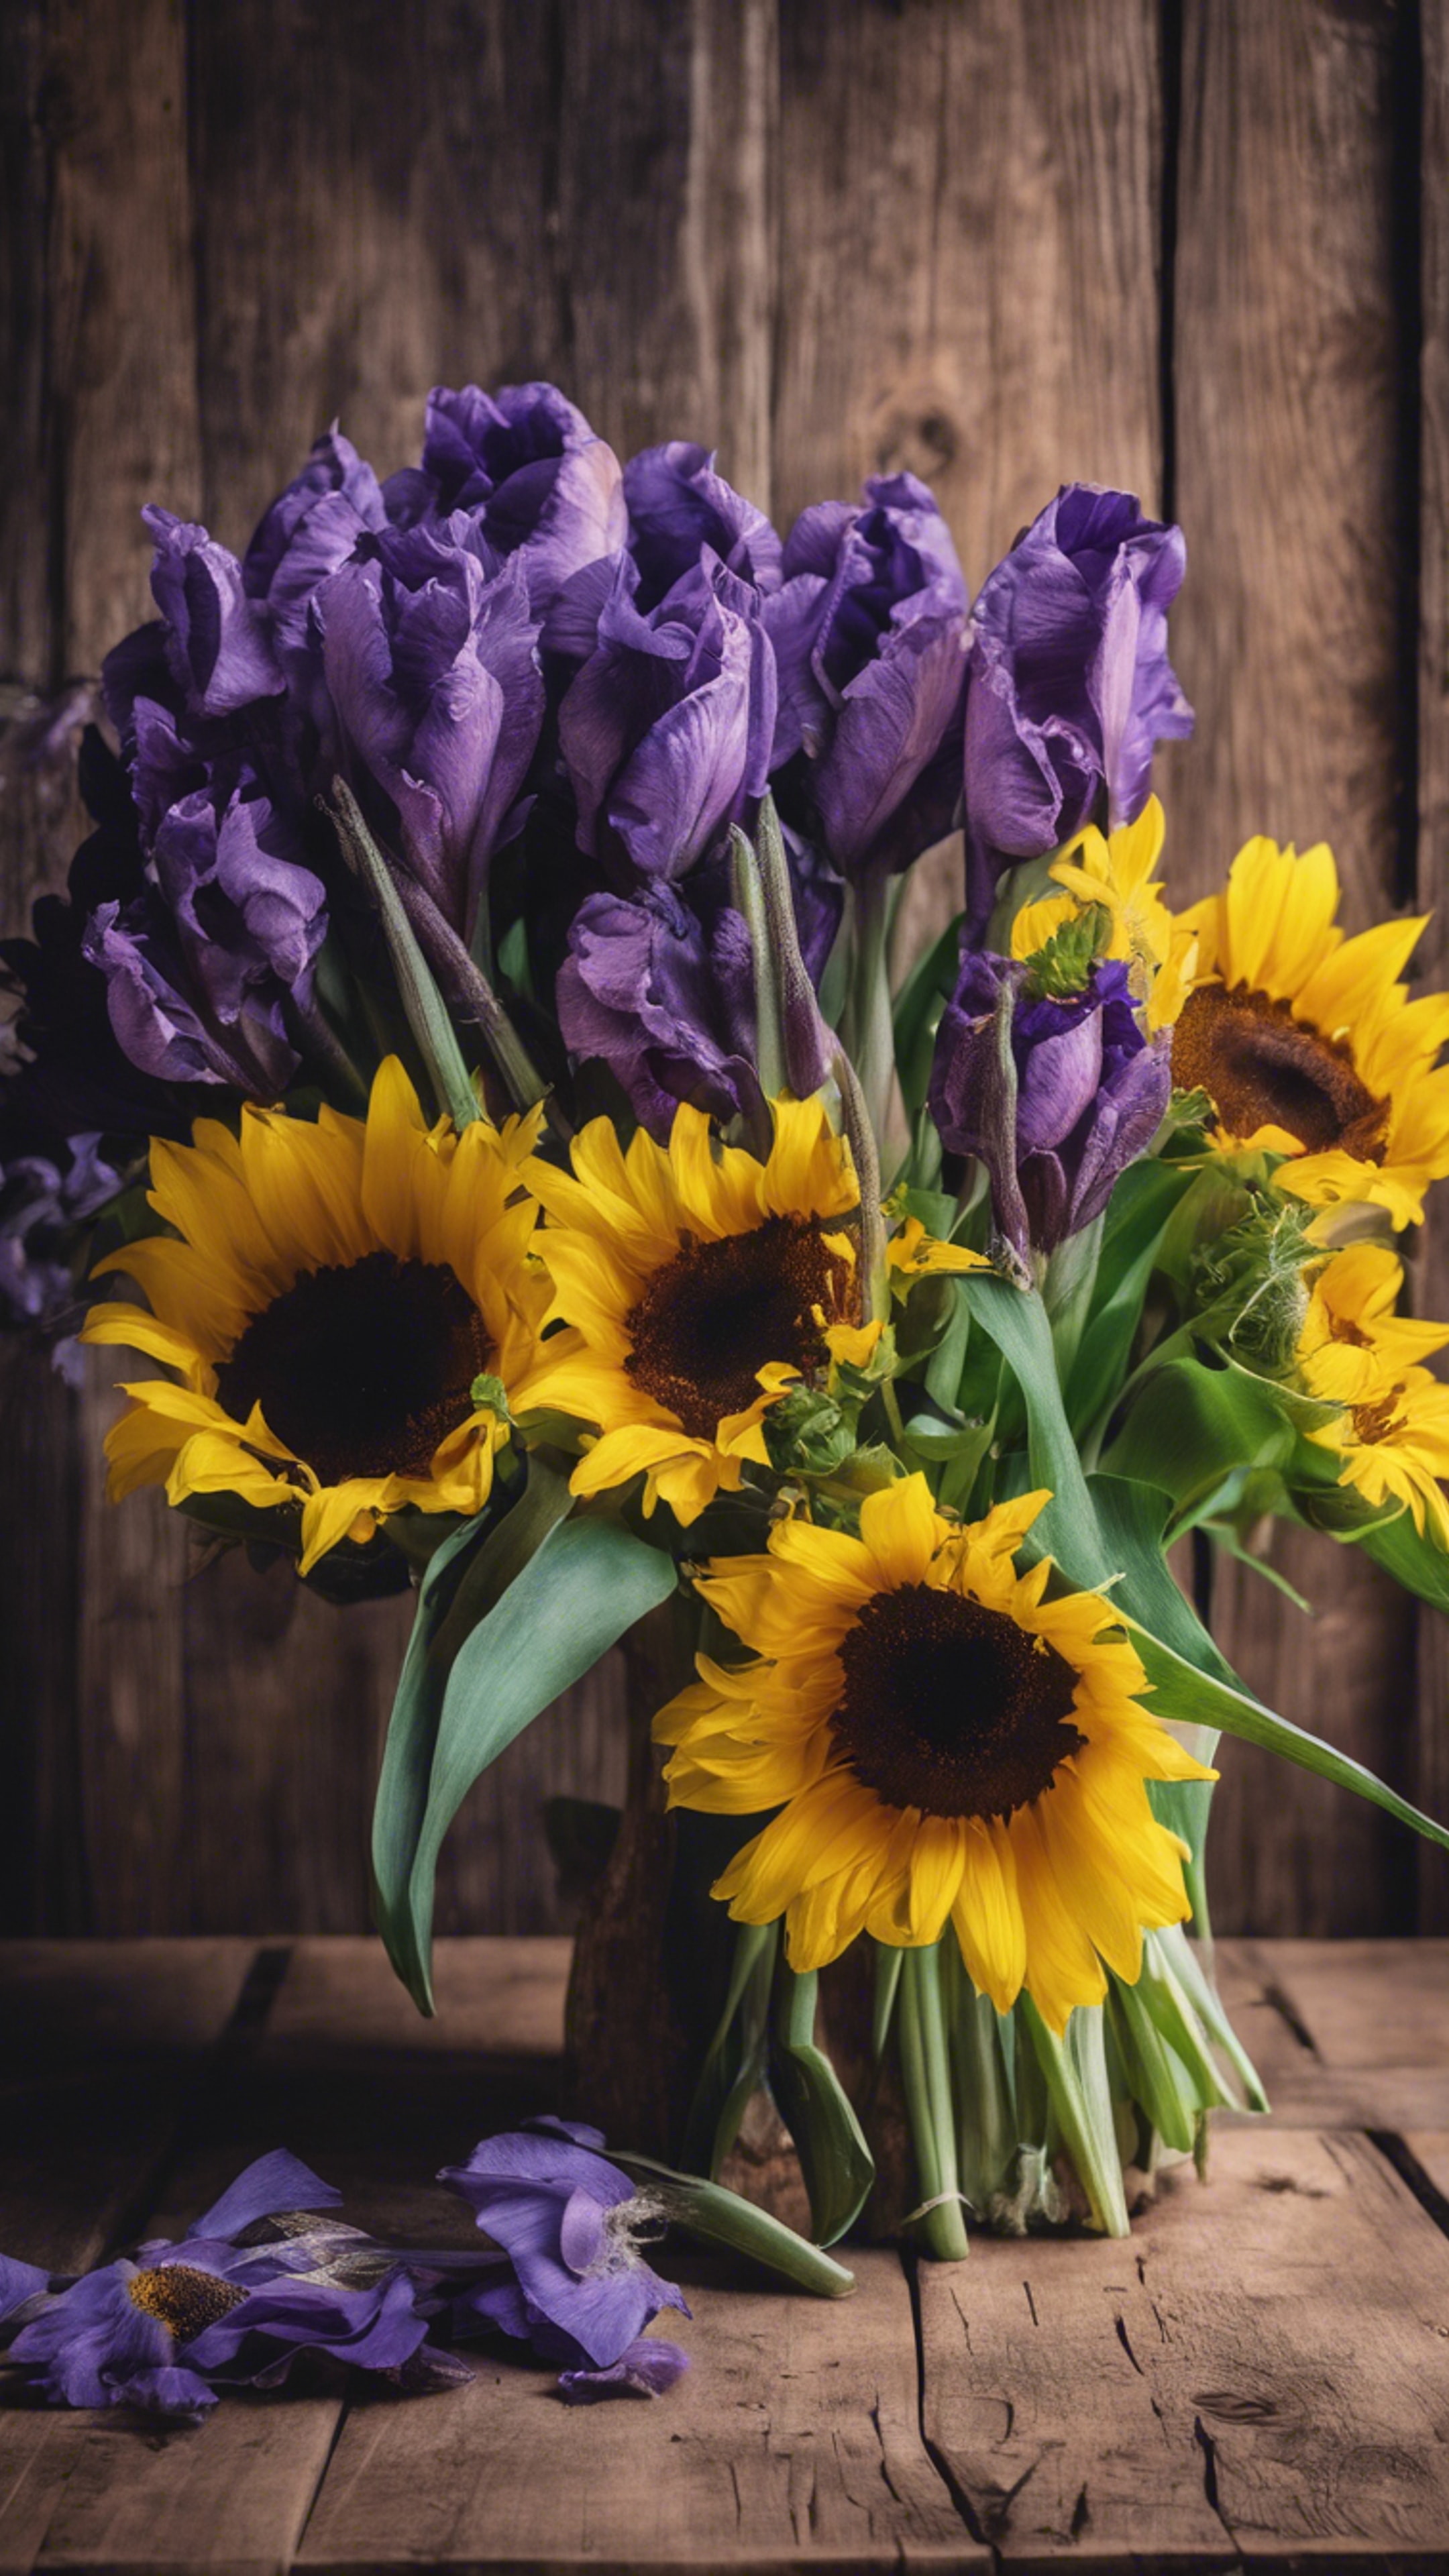 A bouquet of violet irises and bright yellow sunflowers sitting on a rustic wooden table. Tapeta[036542cc0bff4a9eafa2]